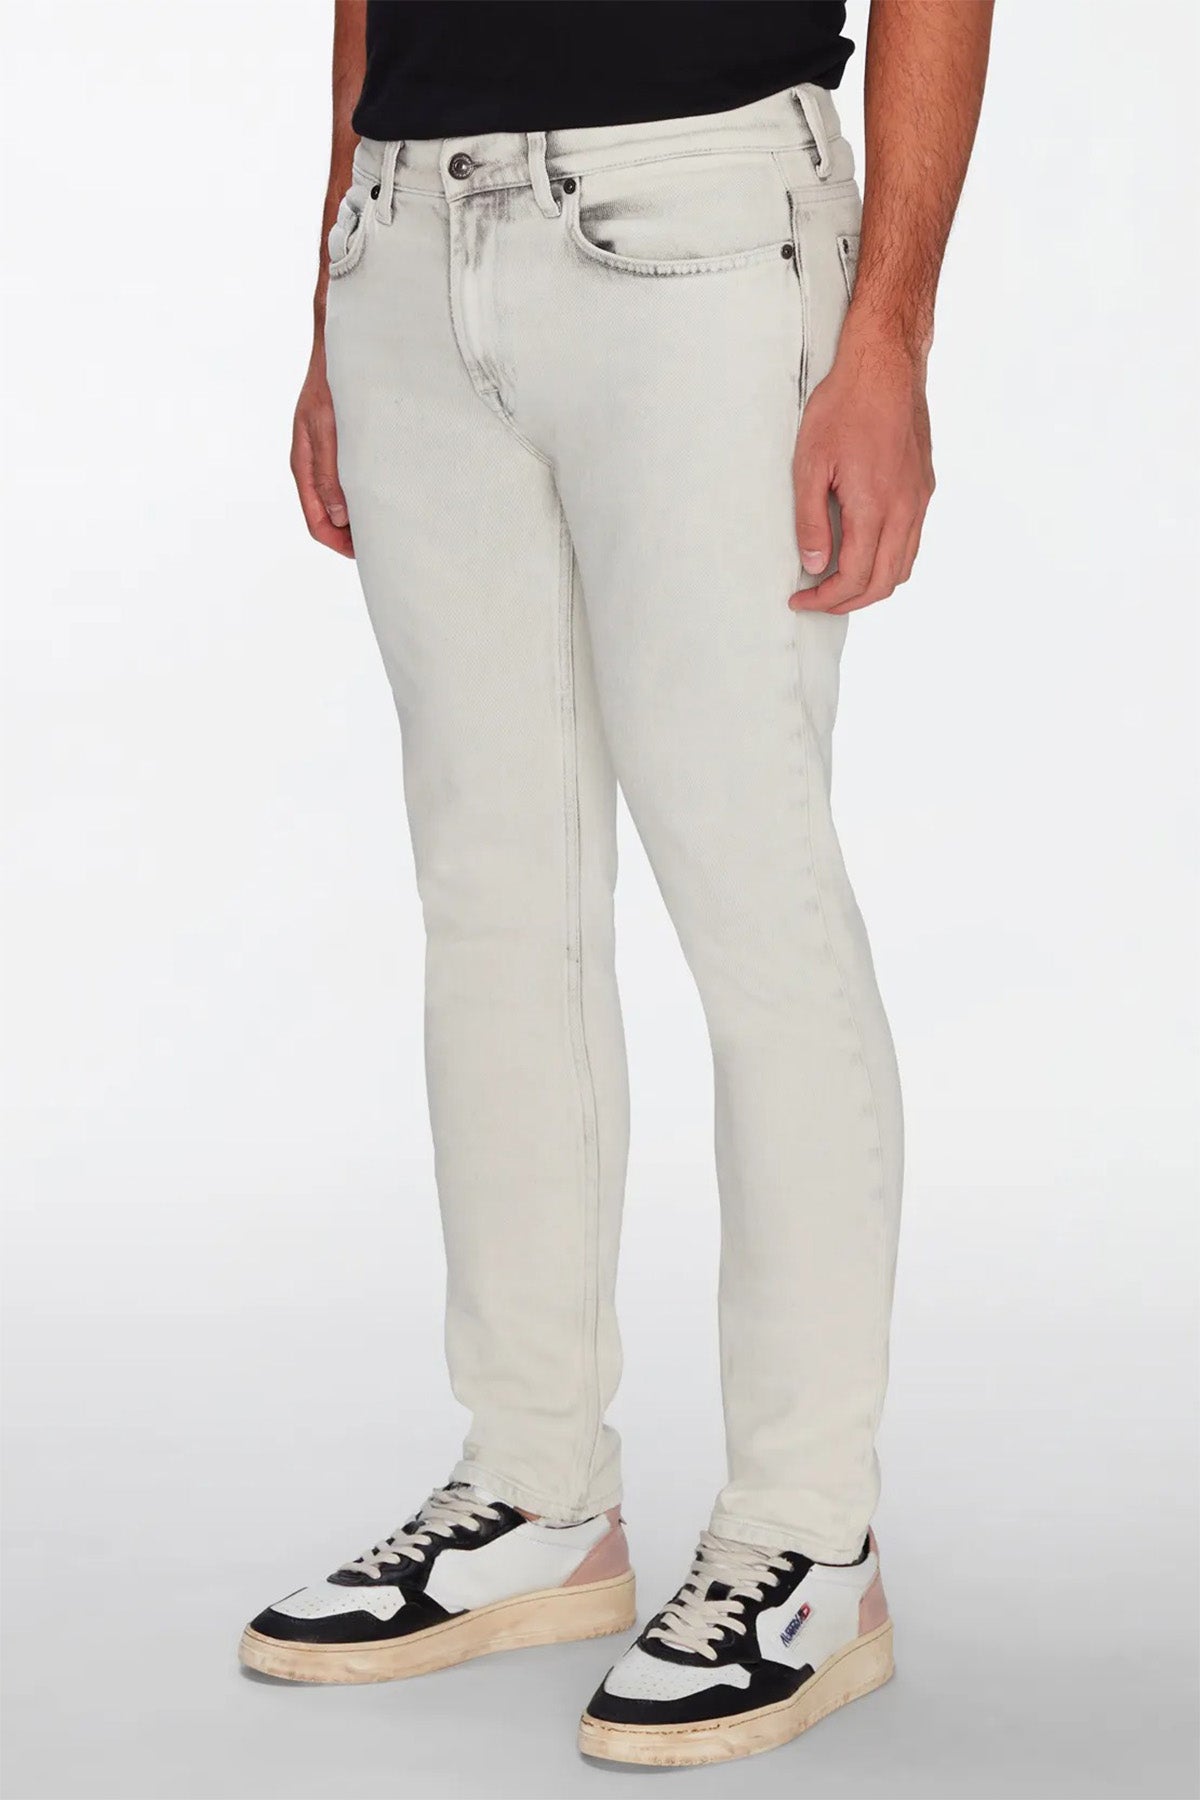 7 For All Mankind Paxtyn Skinny Fit Jeans